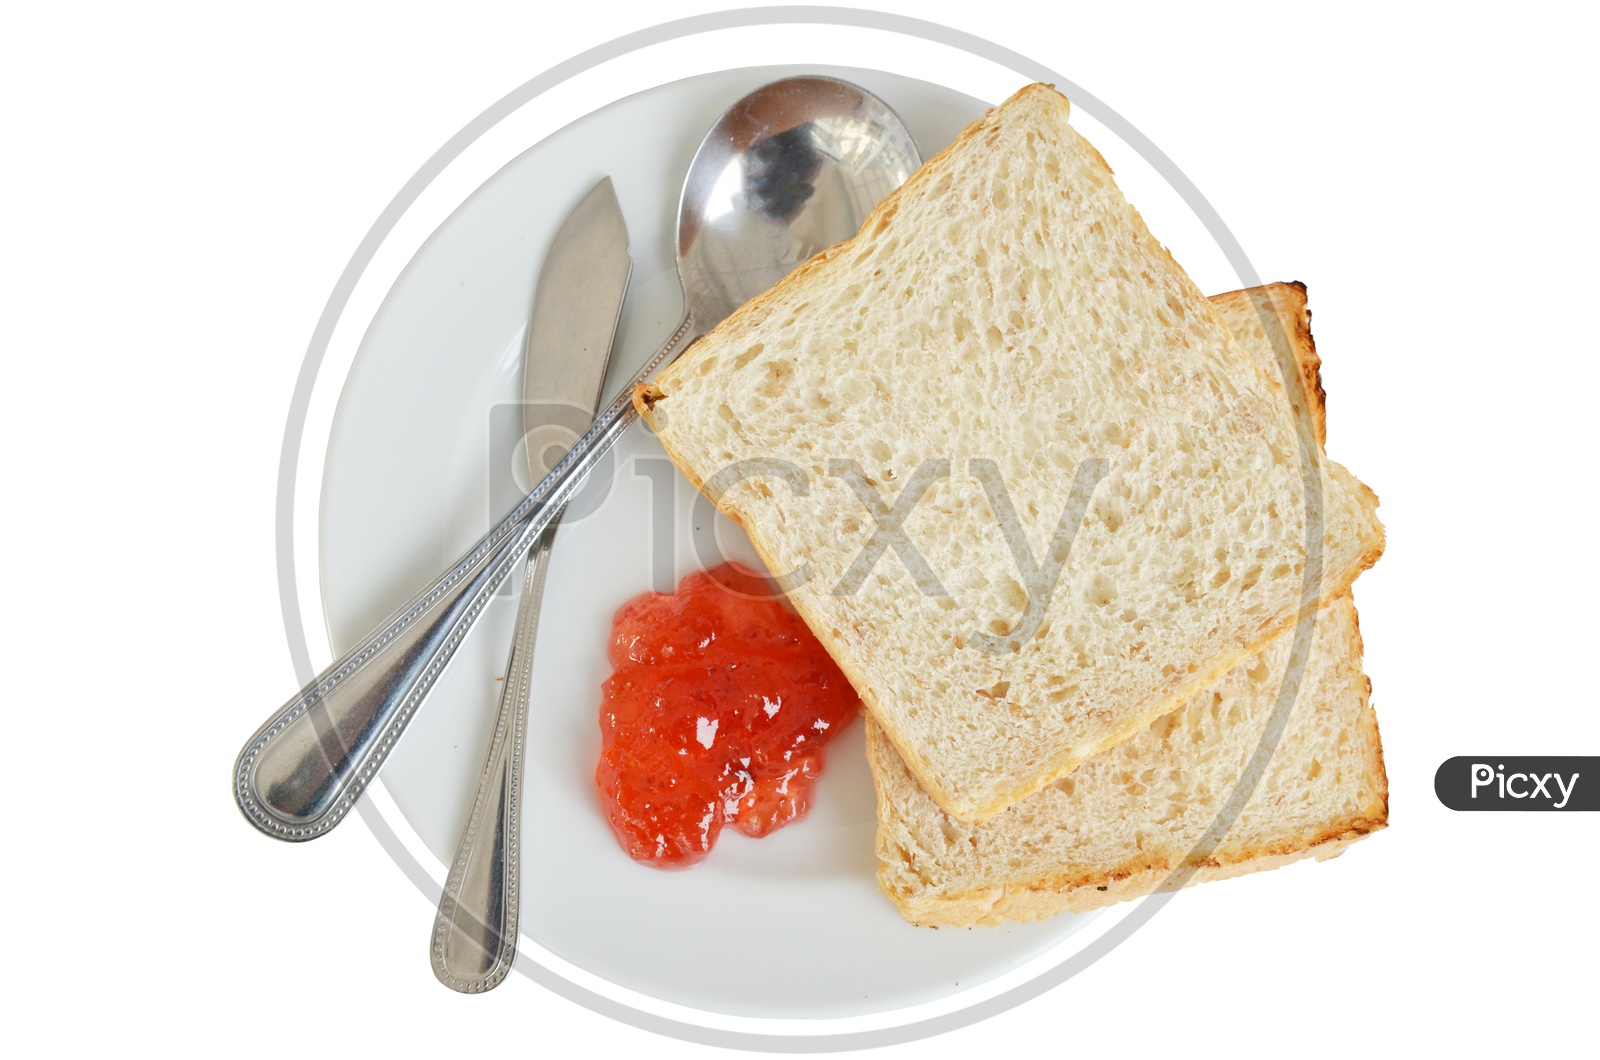 Toasted Bread With Jam Closeup in a Plate Over an Isolated White Background